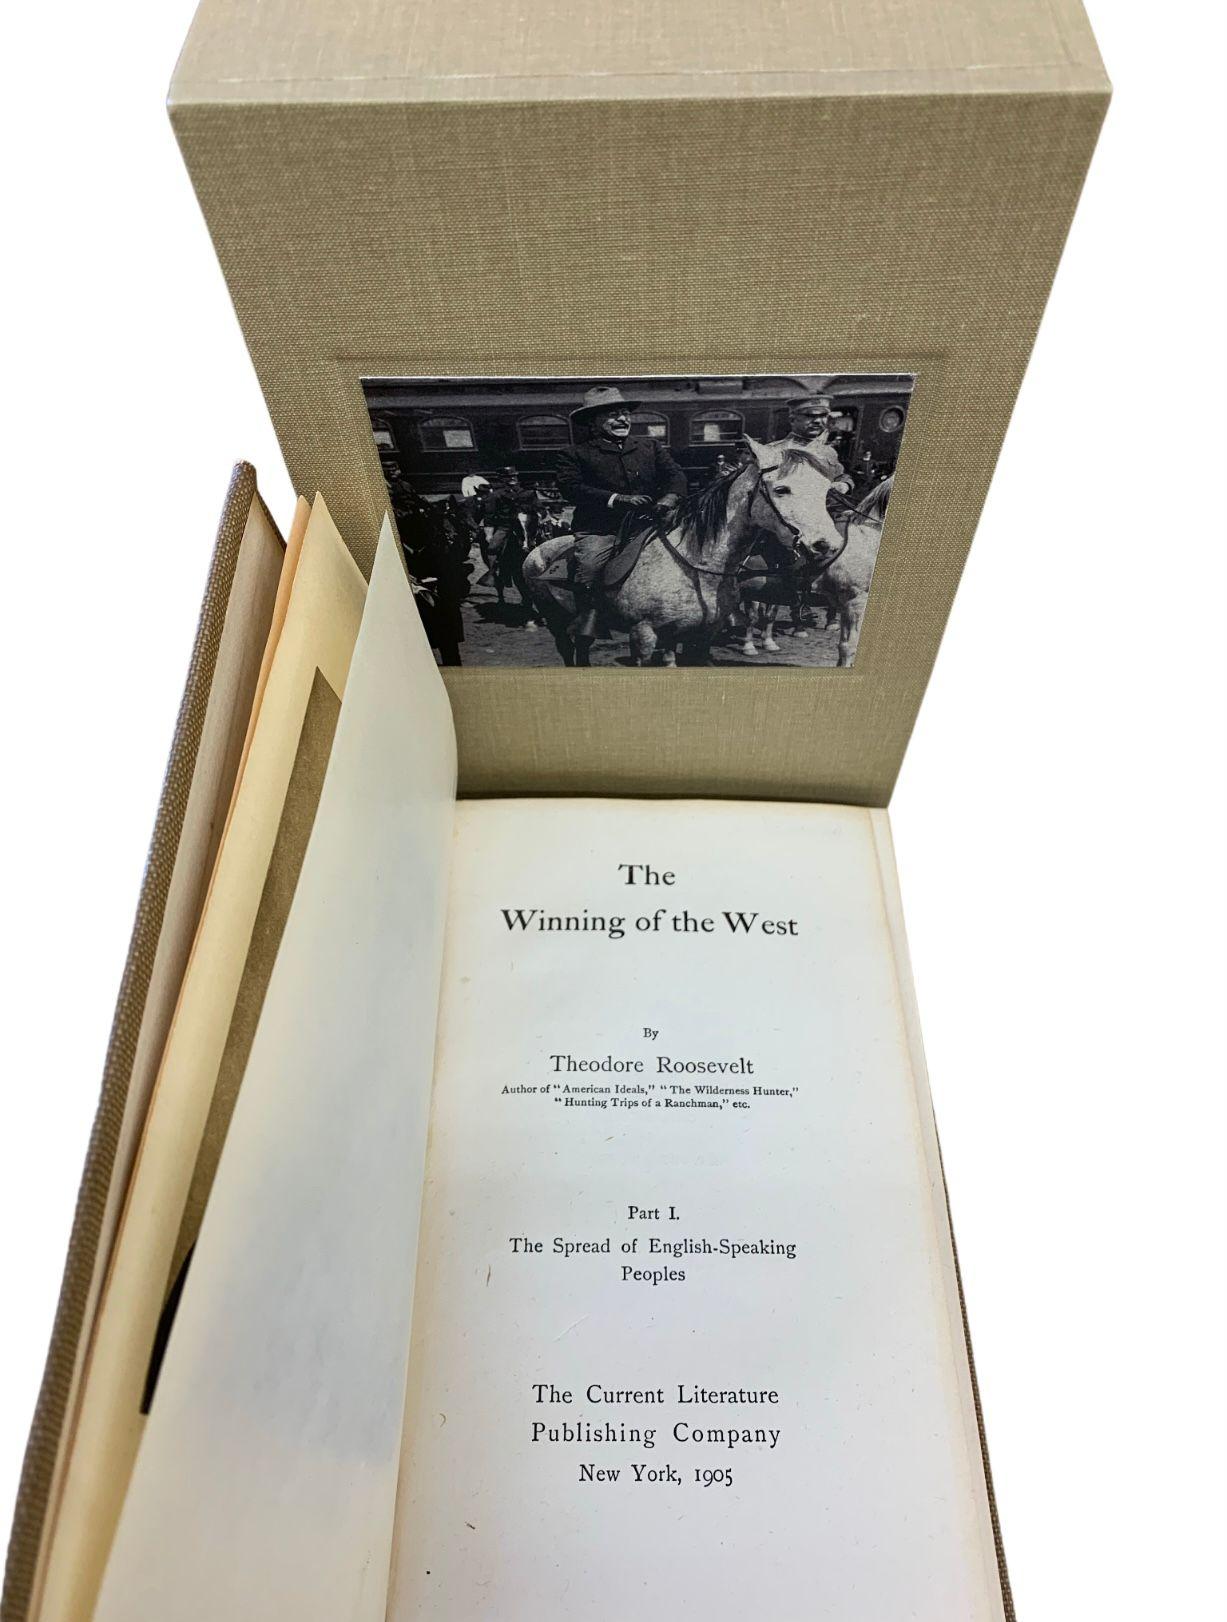 Roosevelt, Theodore. The Winning of the West, in Six Volumes. New York: The Current Literature, 1905. In original suede leather spines over buckram bindings, with embossed titles to spine. Presented with a new archival slipcase. 

The Winning of the